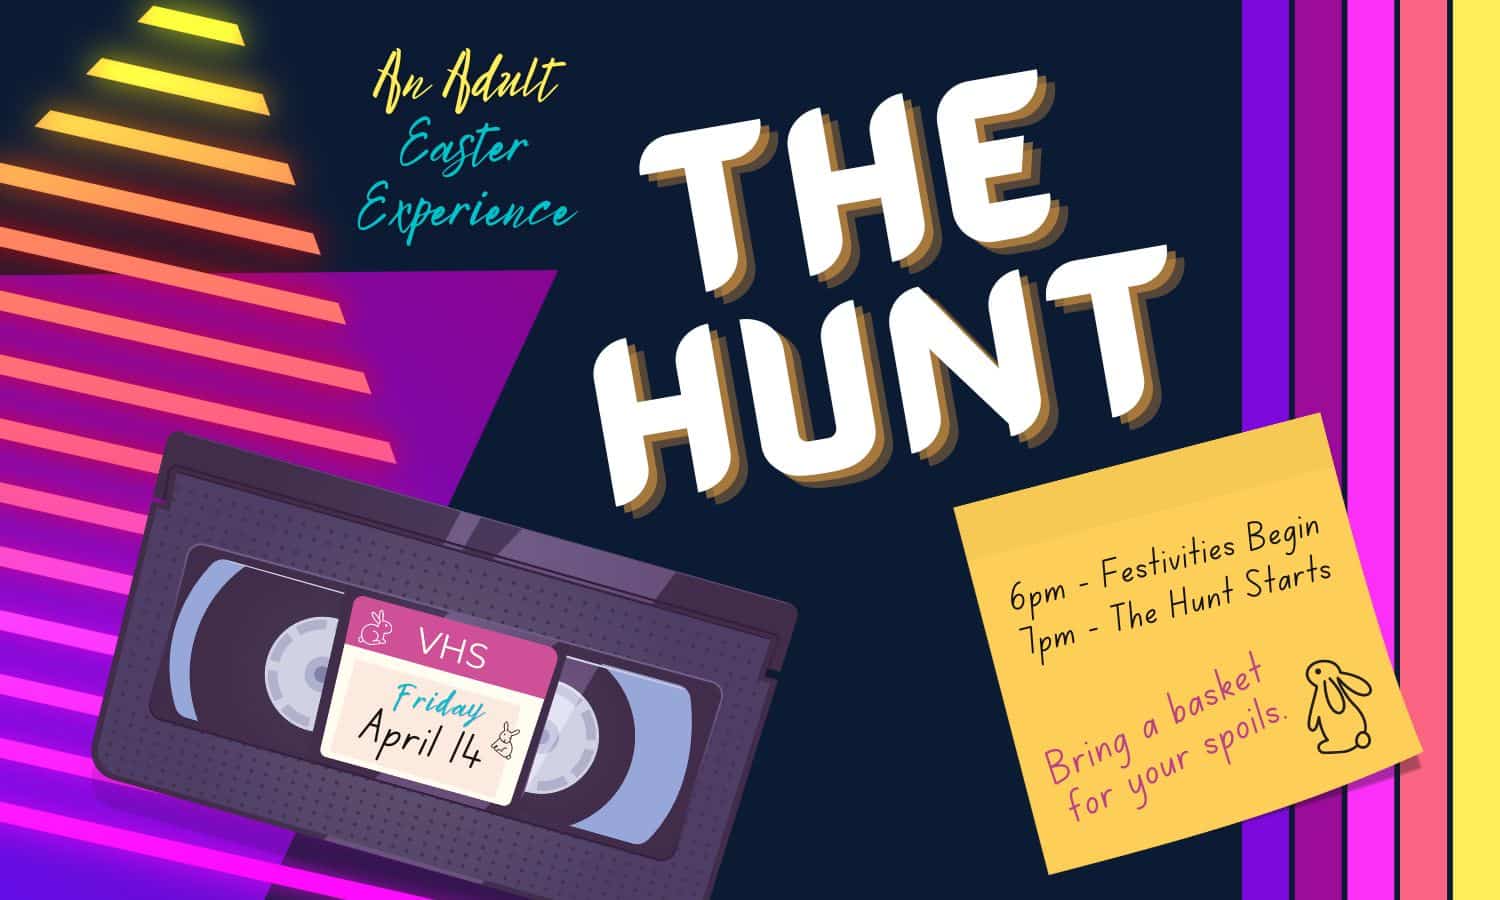 The Hunt- An Adult Easter Egg Experience in Brentwood, TN.